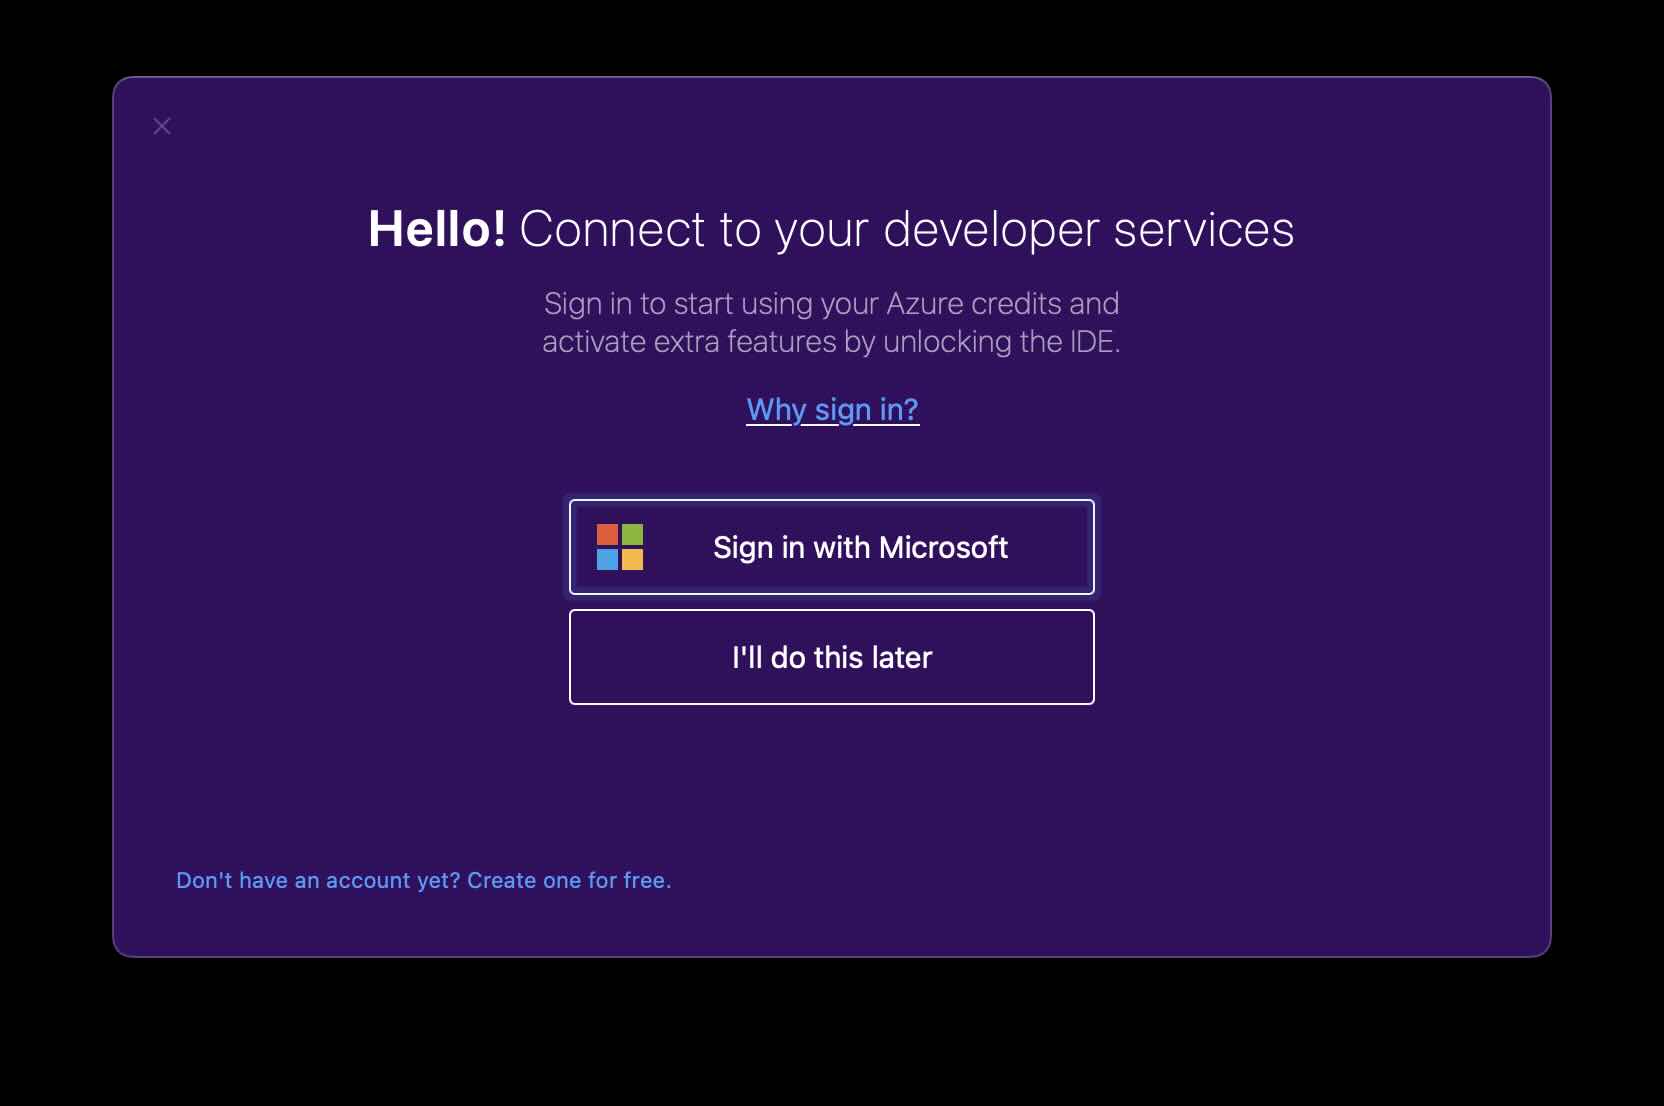 Hello - Sign in to start using your Azure credits and activate extra features by unlocking the Visual Studio IDE